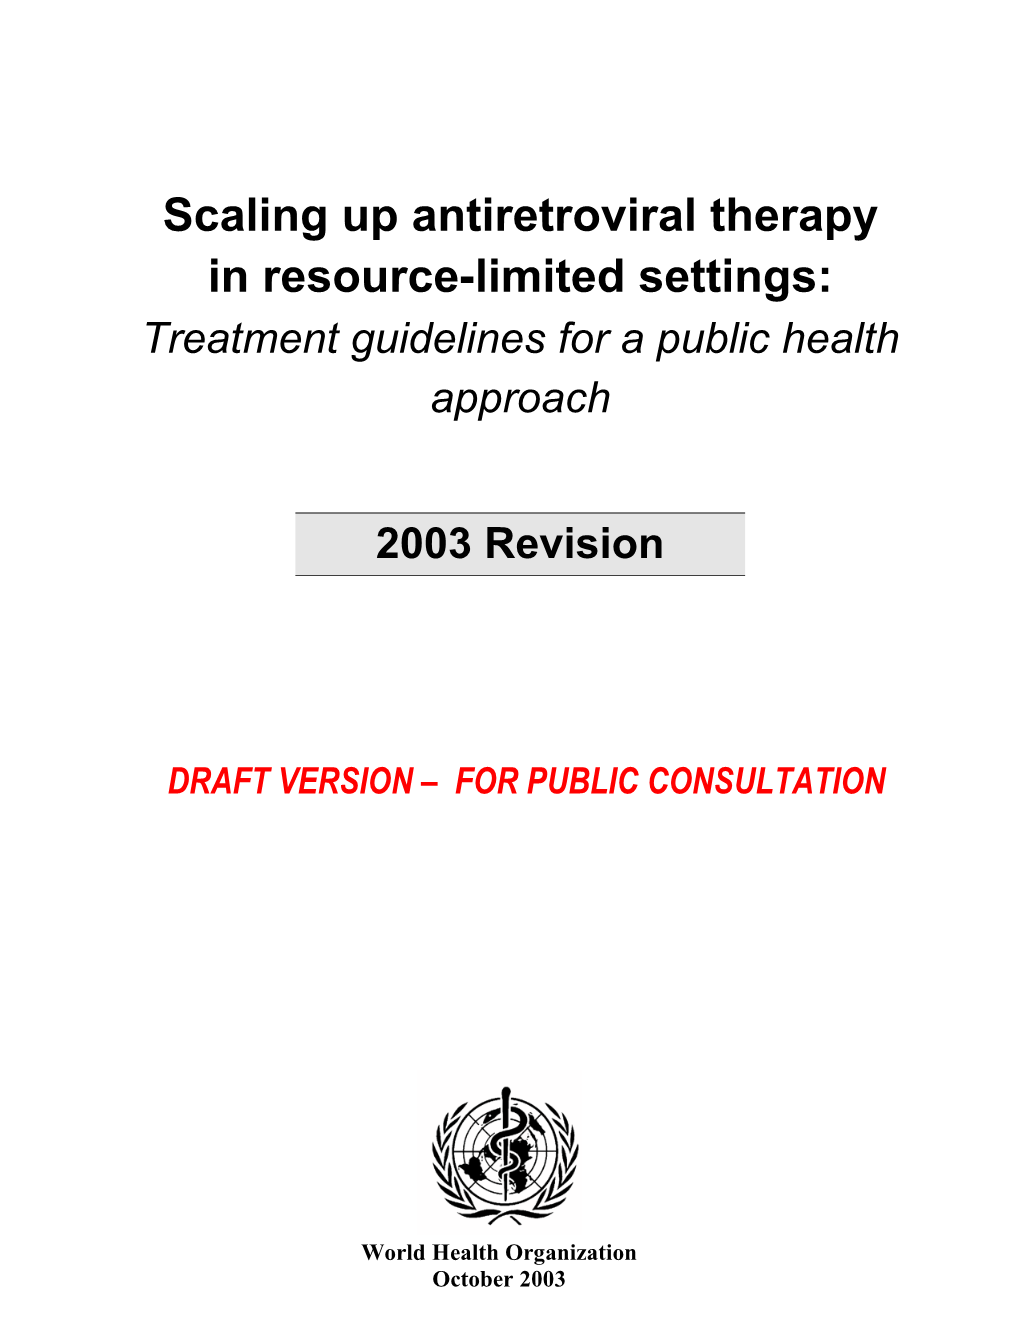 Scaling up Antiretroviral Therapy in Resource-Limited Settings: Treatment Guidelines for a Public Health Approach